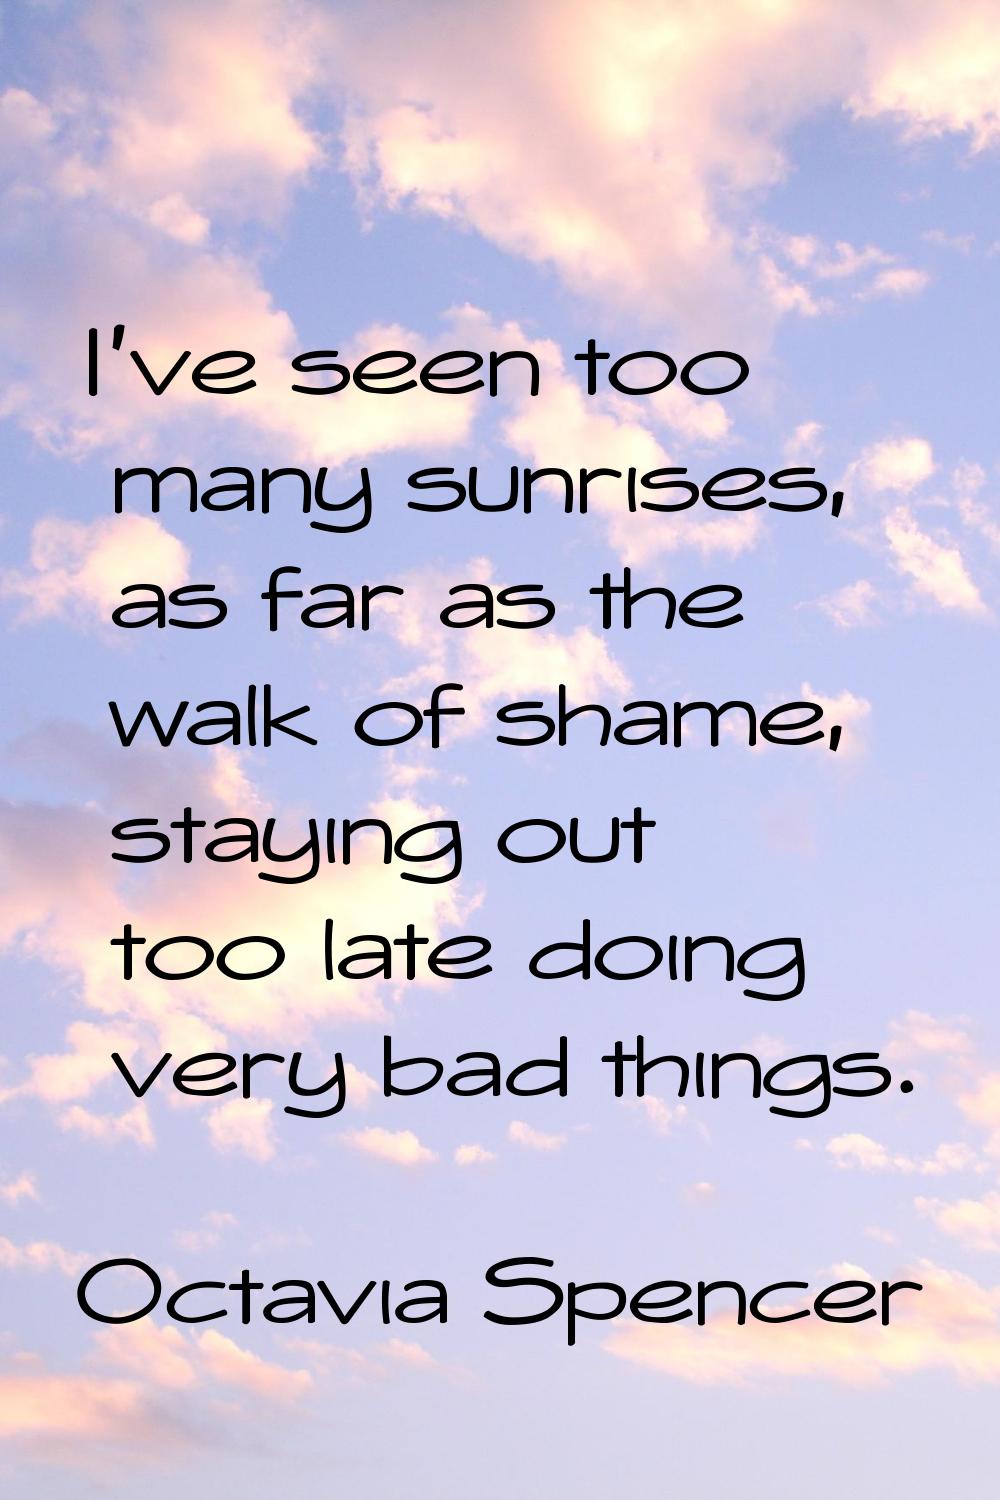 I've seen too many sunrises, as far as the walk of shame, staying out too late doing very bad thing